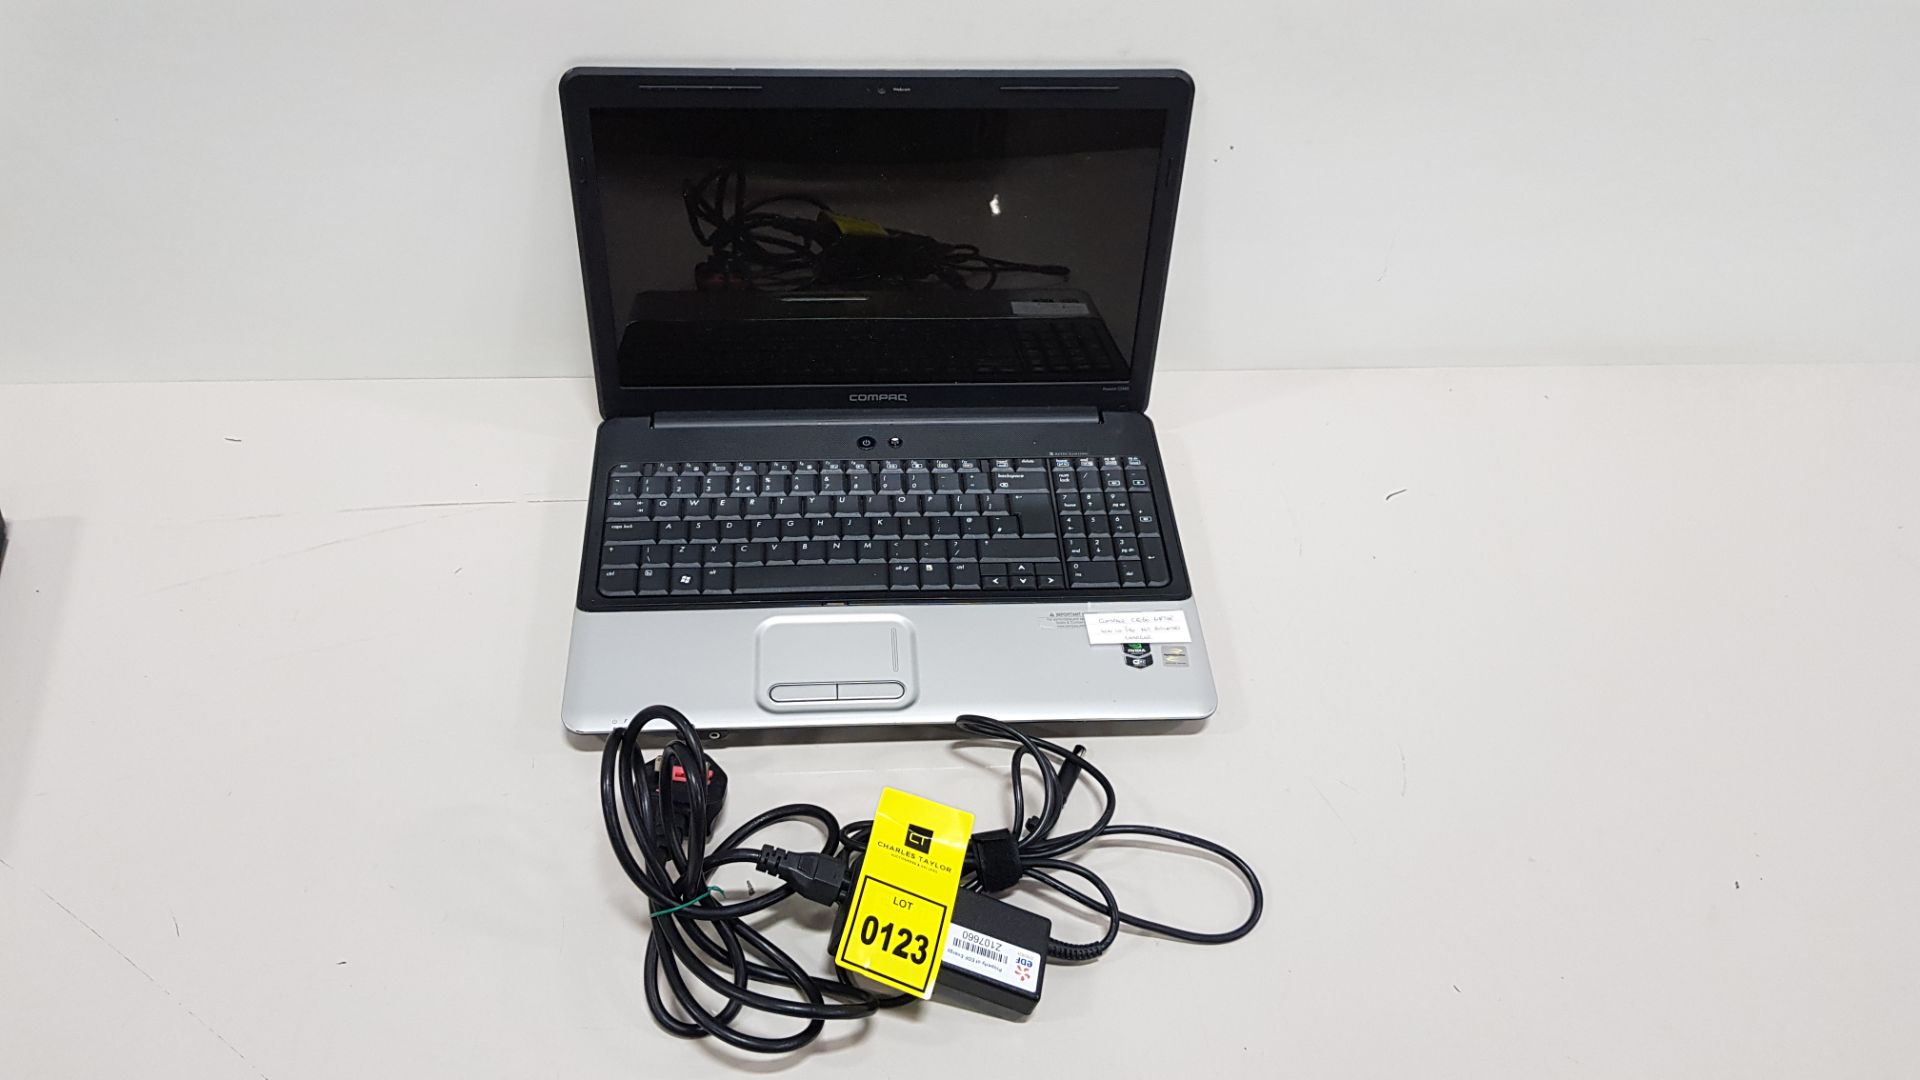 COMPAQ CQ60 LAPTOP WINDOWS 10 PRO NOT ACTIVATED - WITH CHARGER